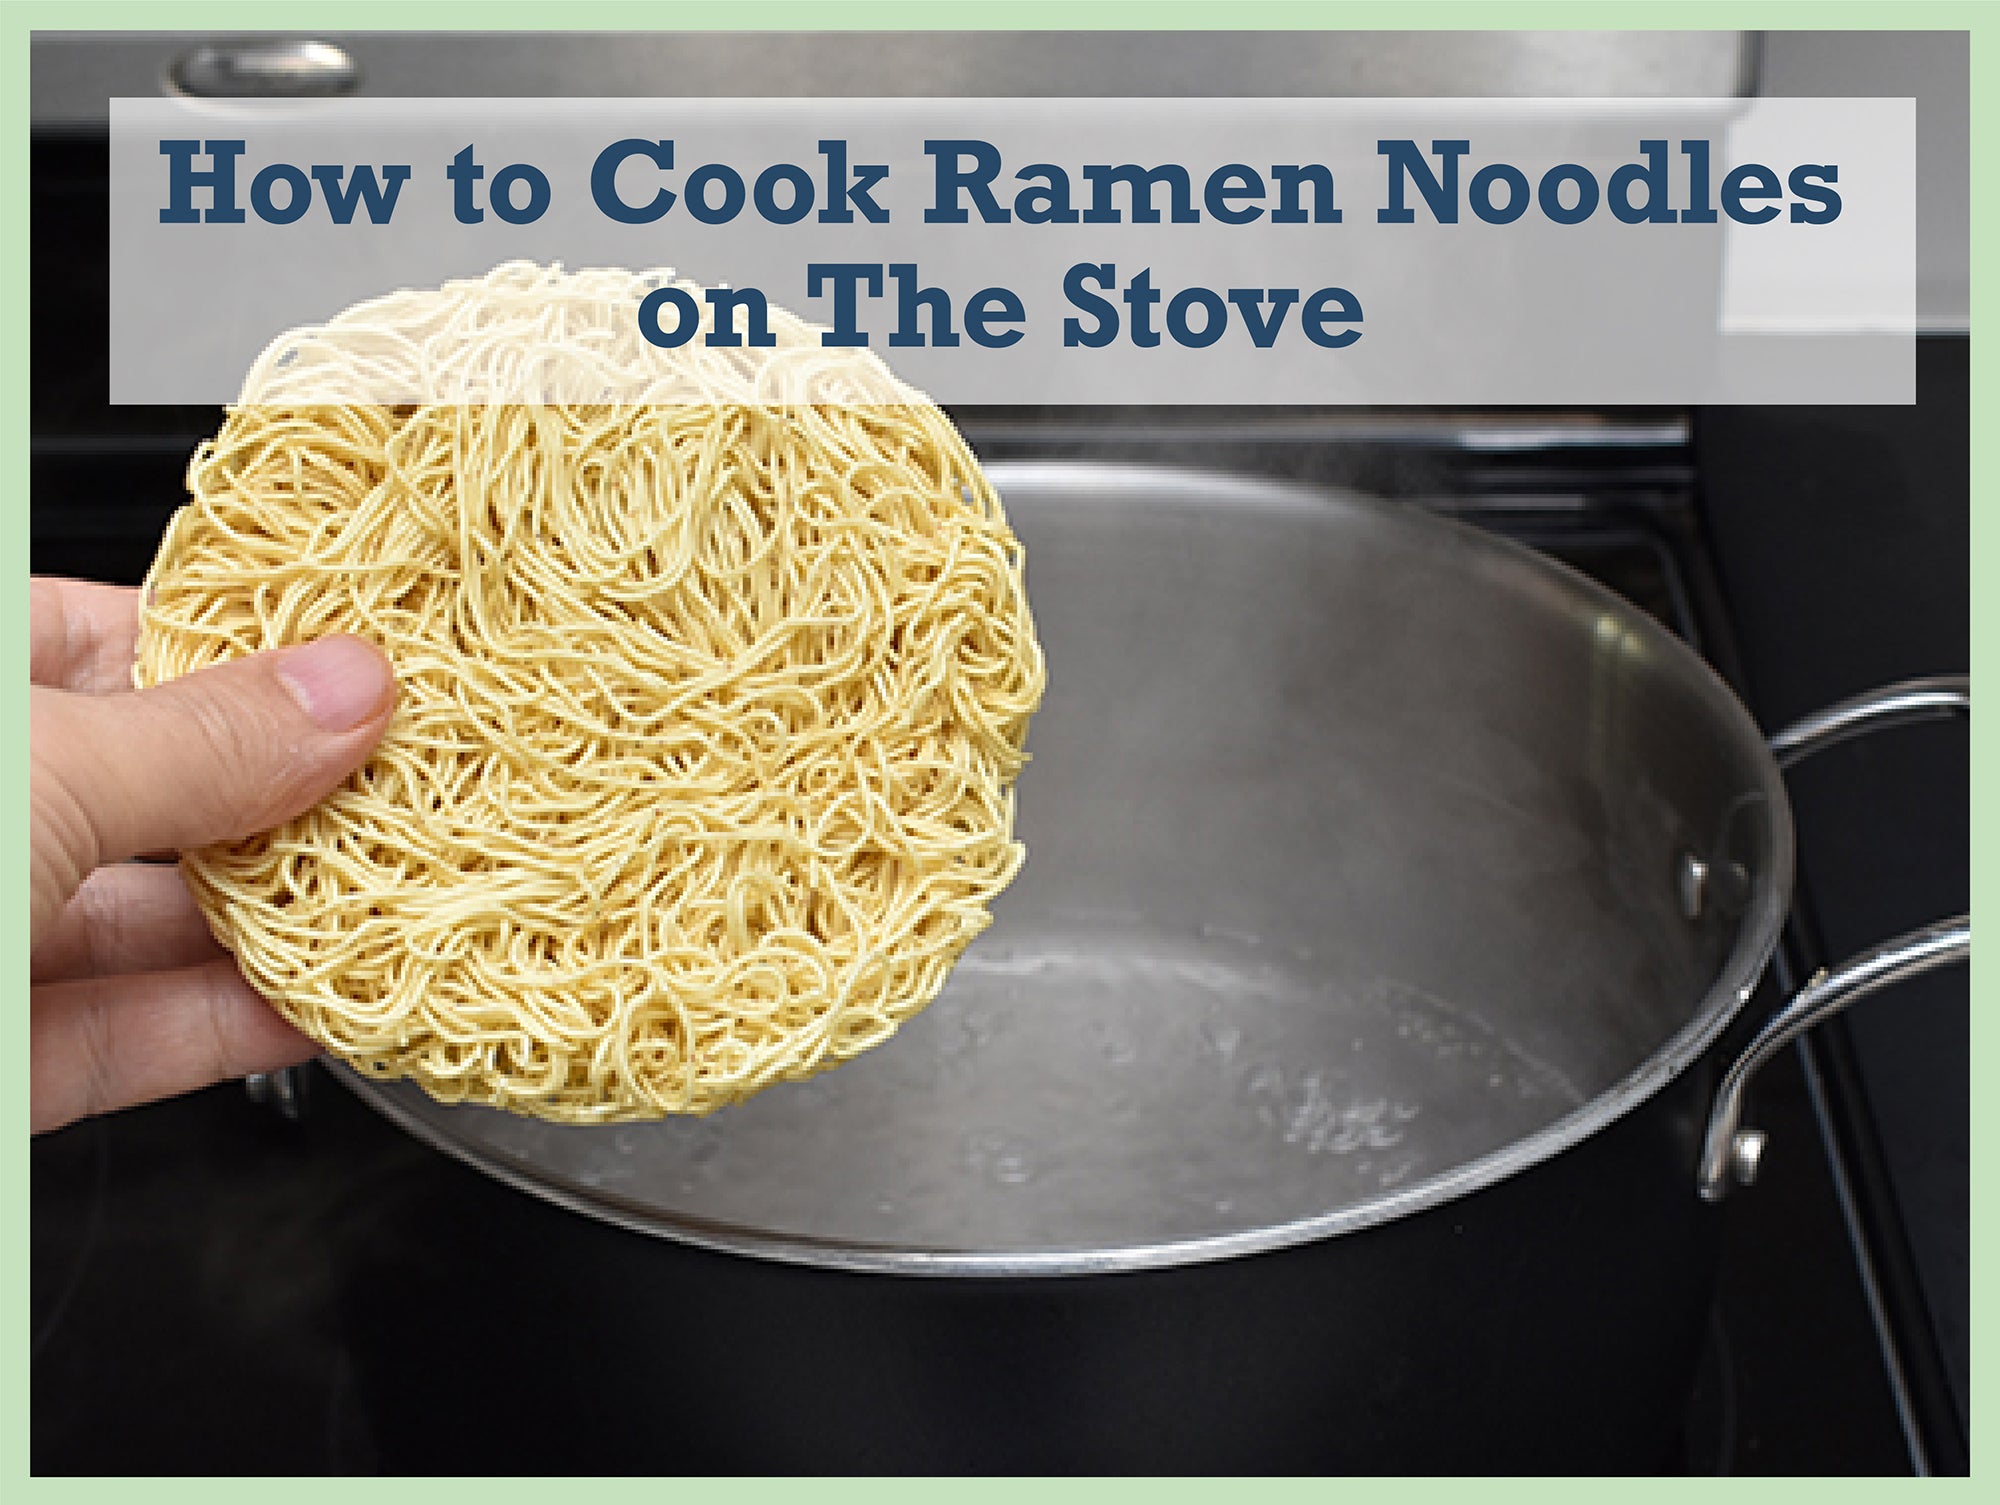 How to Cook Ramen Noodles on The Stove: Who Else Wants to Cook Like a Pro?